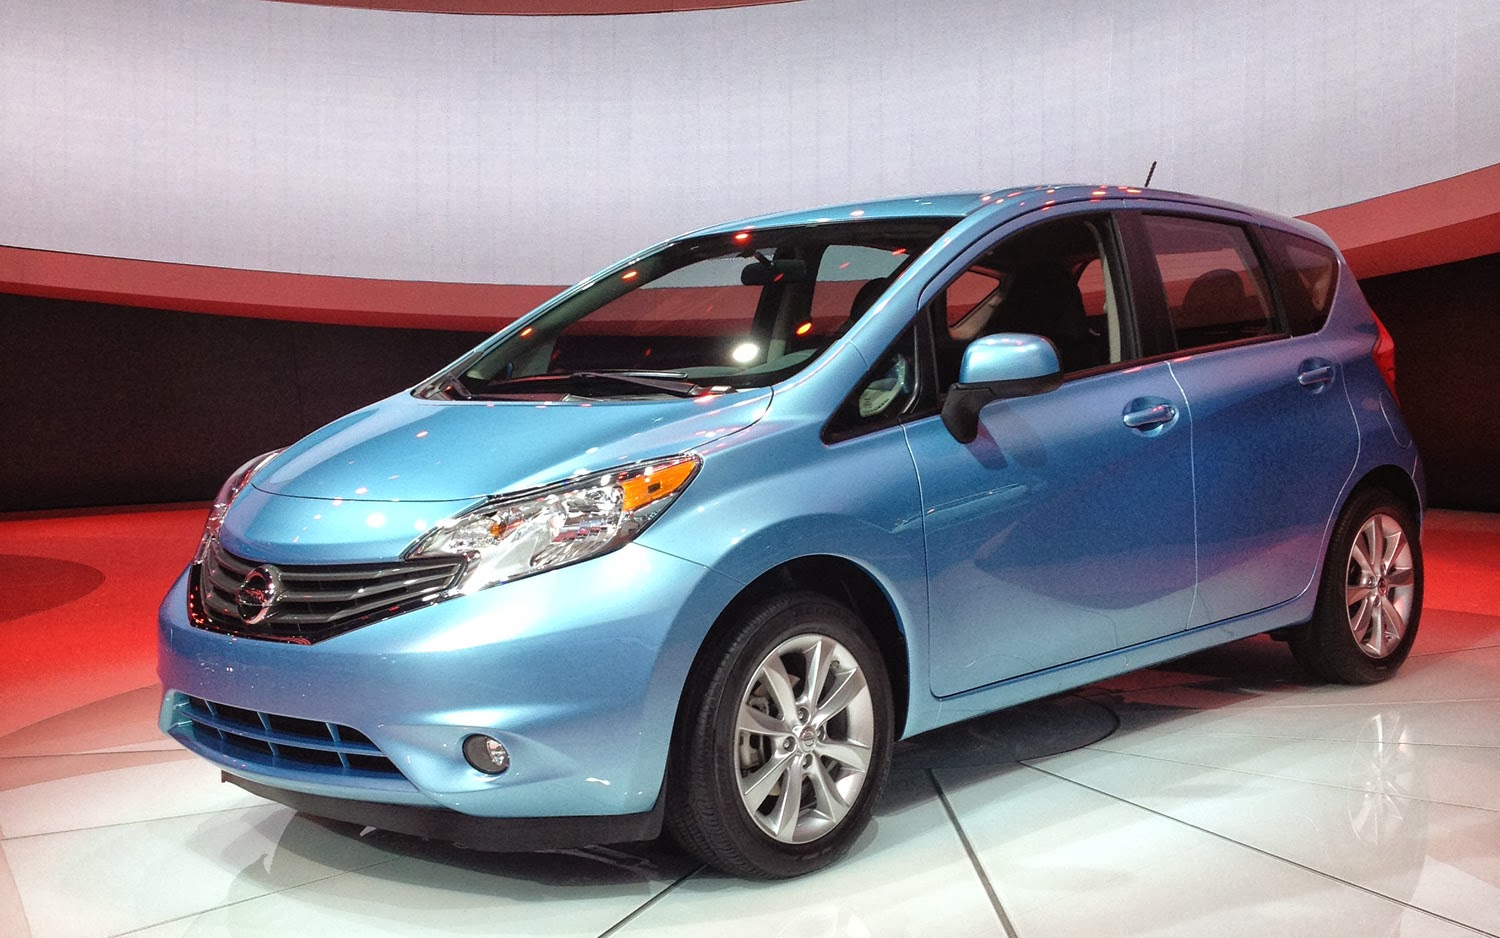 2014 Nissan Versa Note Owners manual Guide Pdf Free